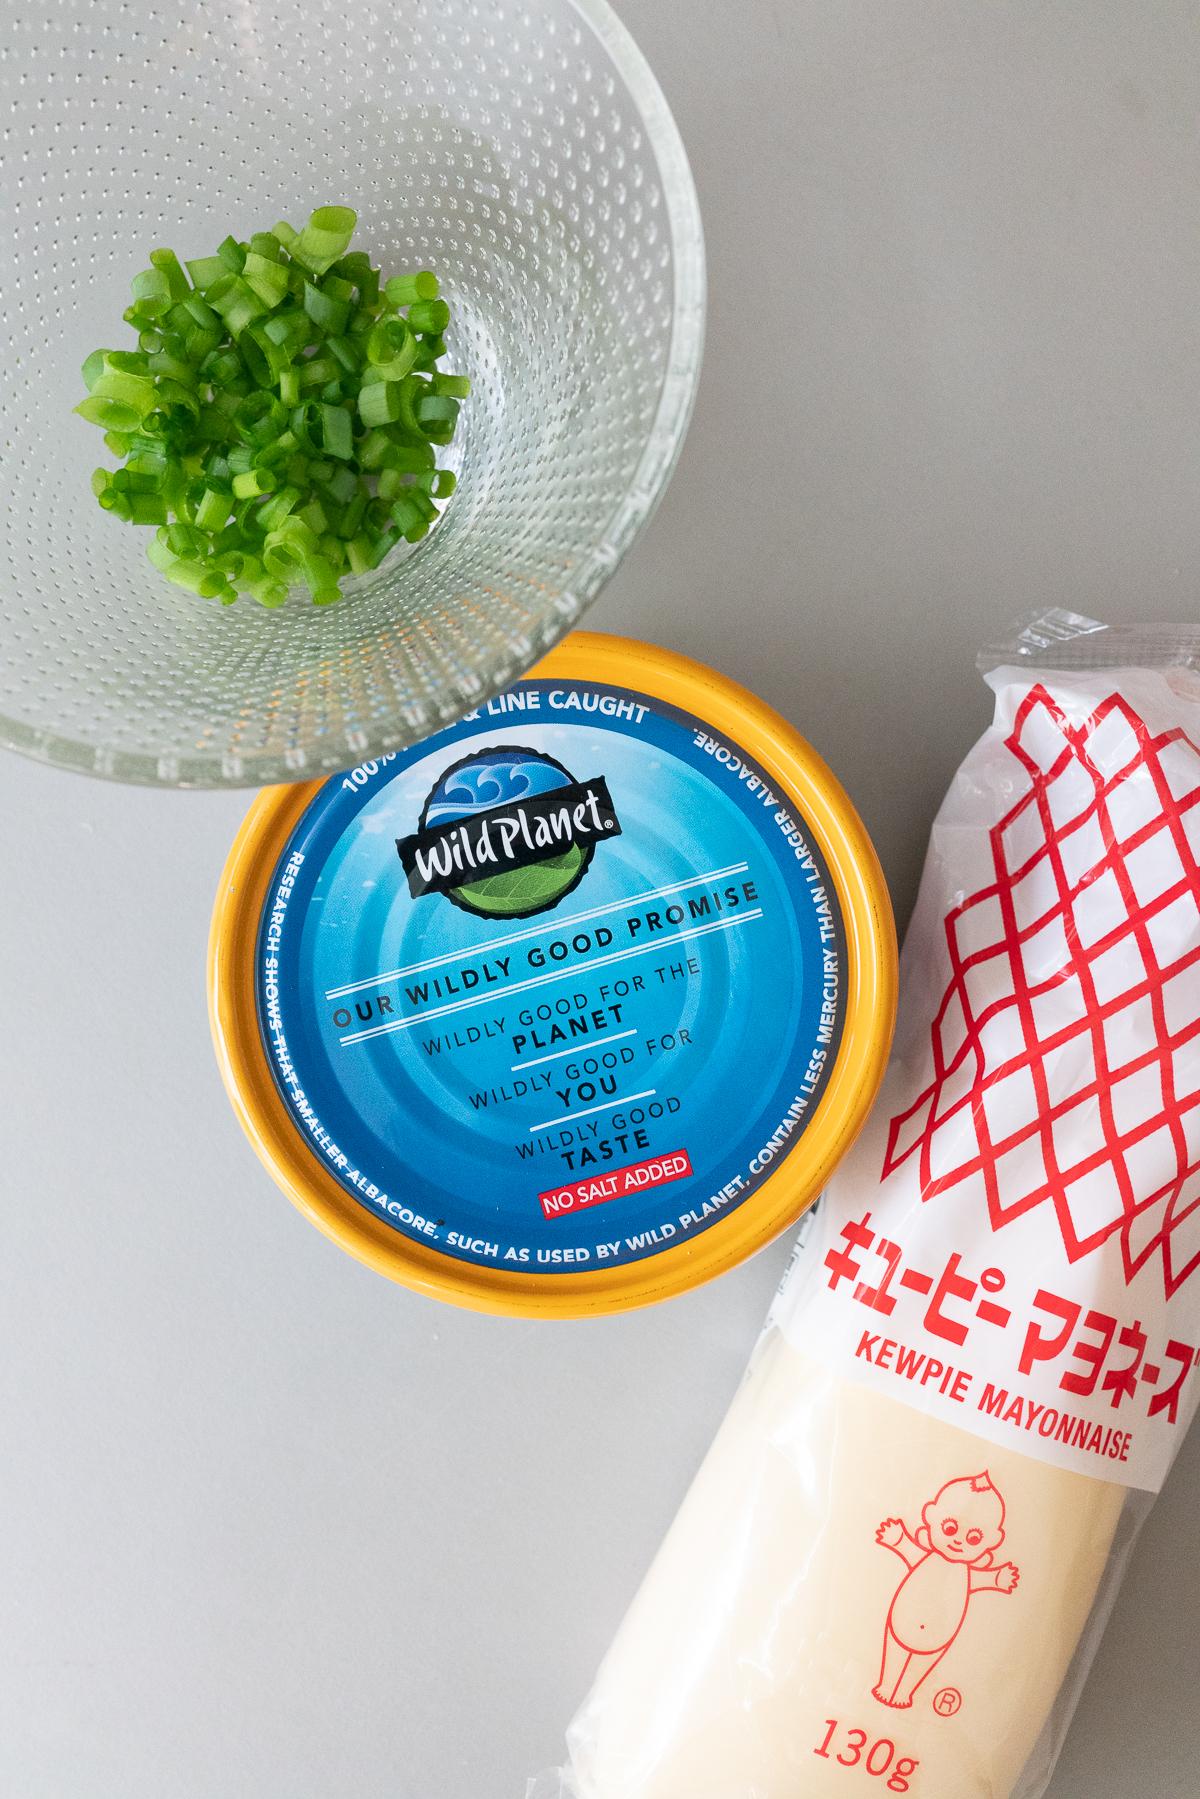 Ingredients for Tuna Rice: canned tuna, green onions, and Kewpie Mayonnaise